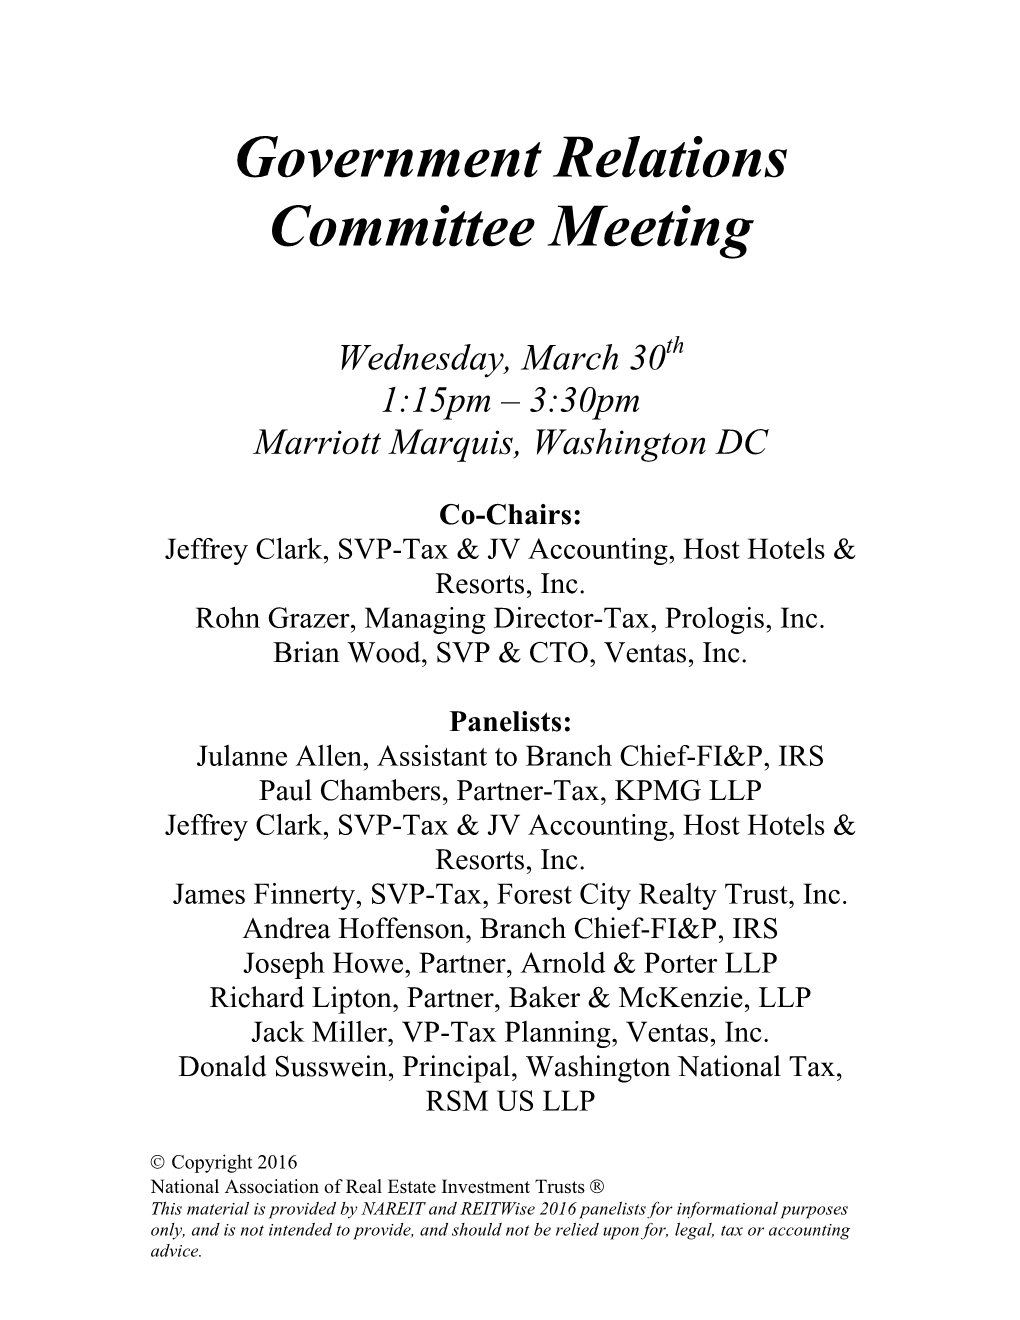 Government Relations Committee Meeting